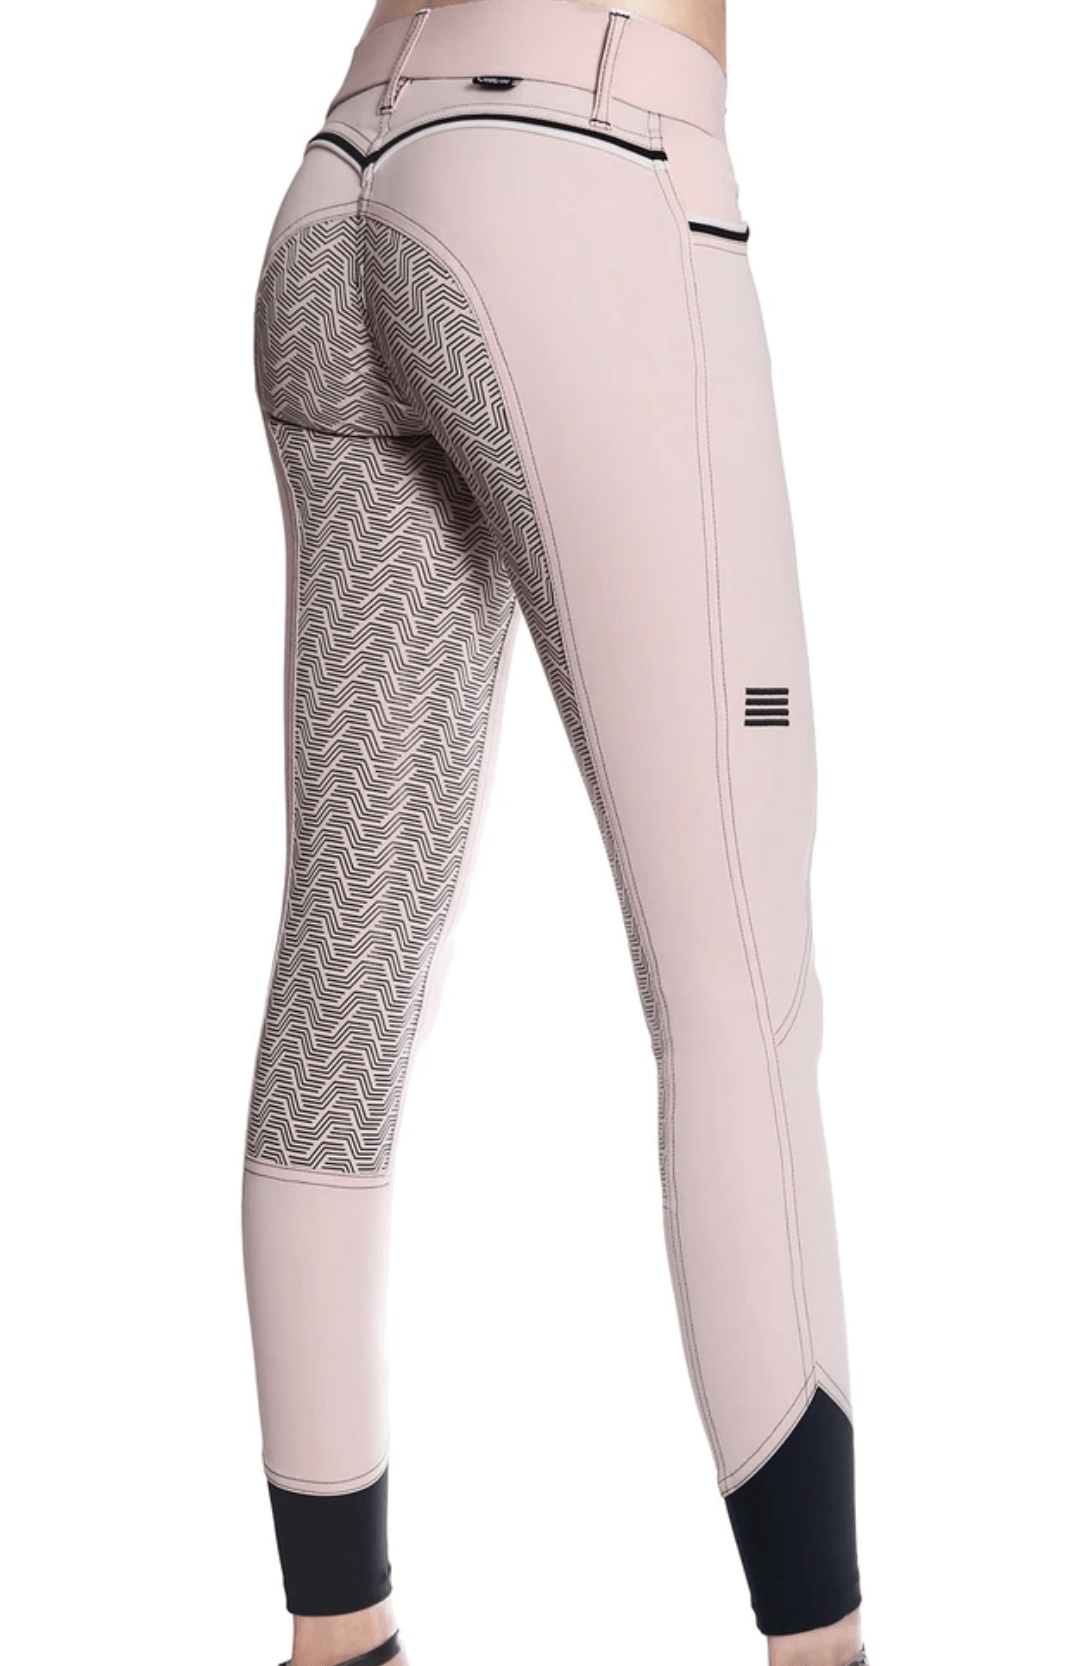 GhoDho Breeches Blush / sz 22 GhoDho Adena Full Seat Breeches equestrian team apparel online tack store mobile tack store custom farm apparel custom show stable clothing equestrian lifestyle horse show clothing riding clothes horses equestrian tack store